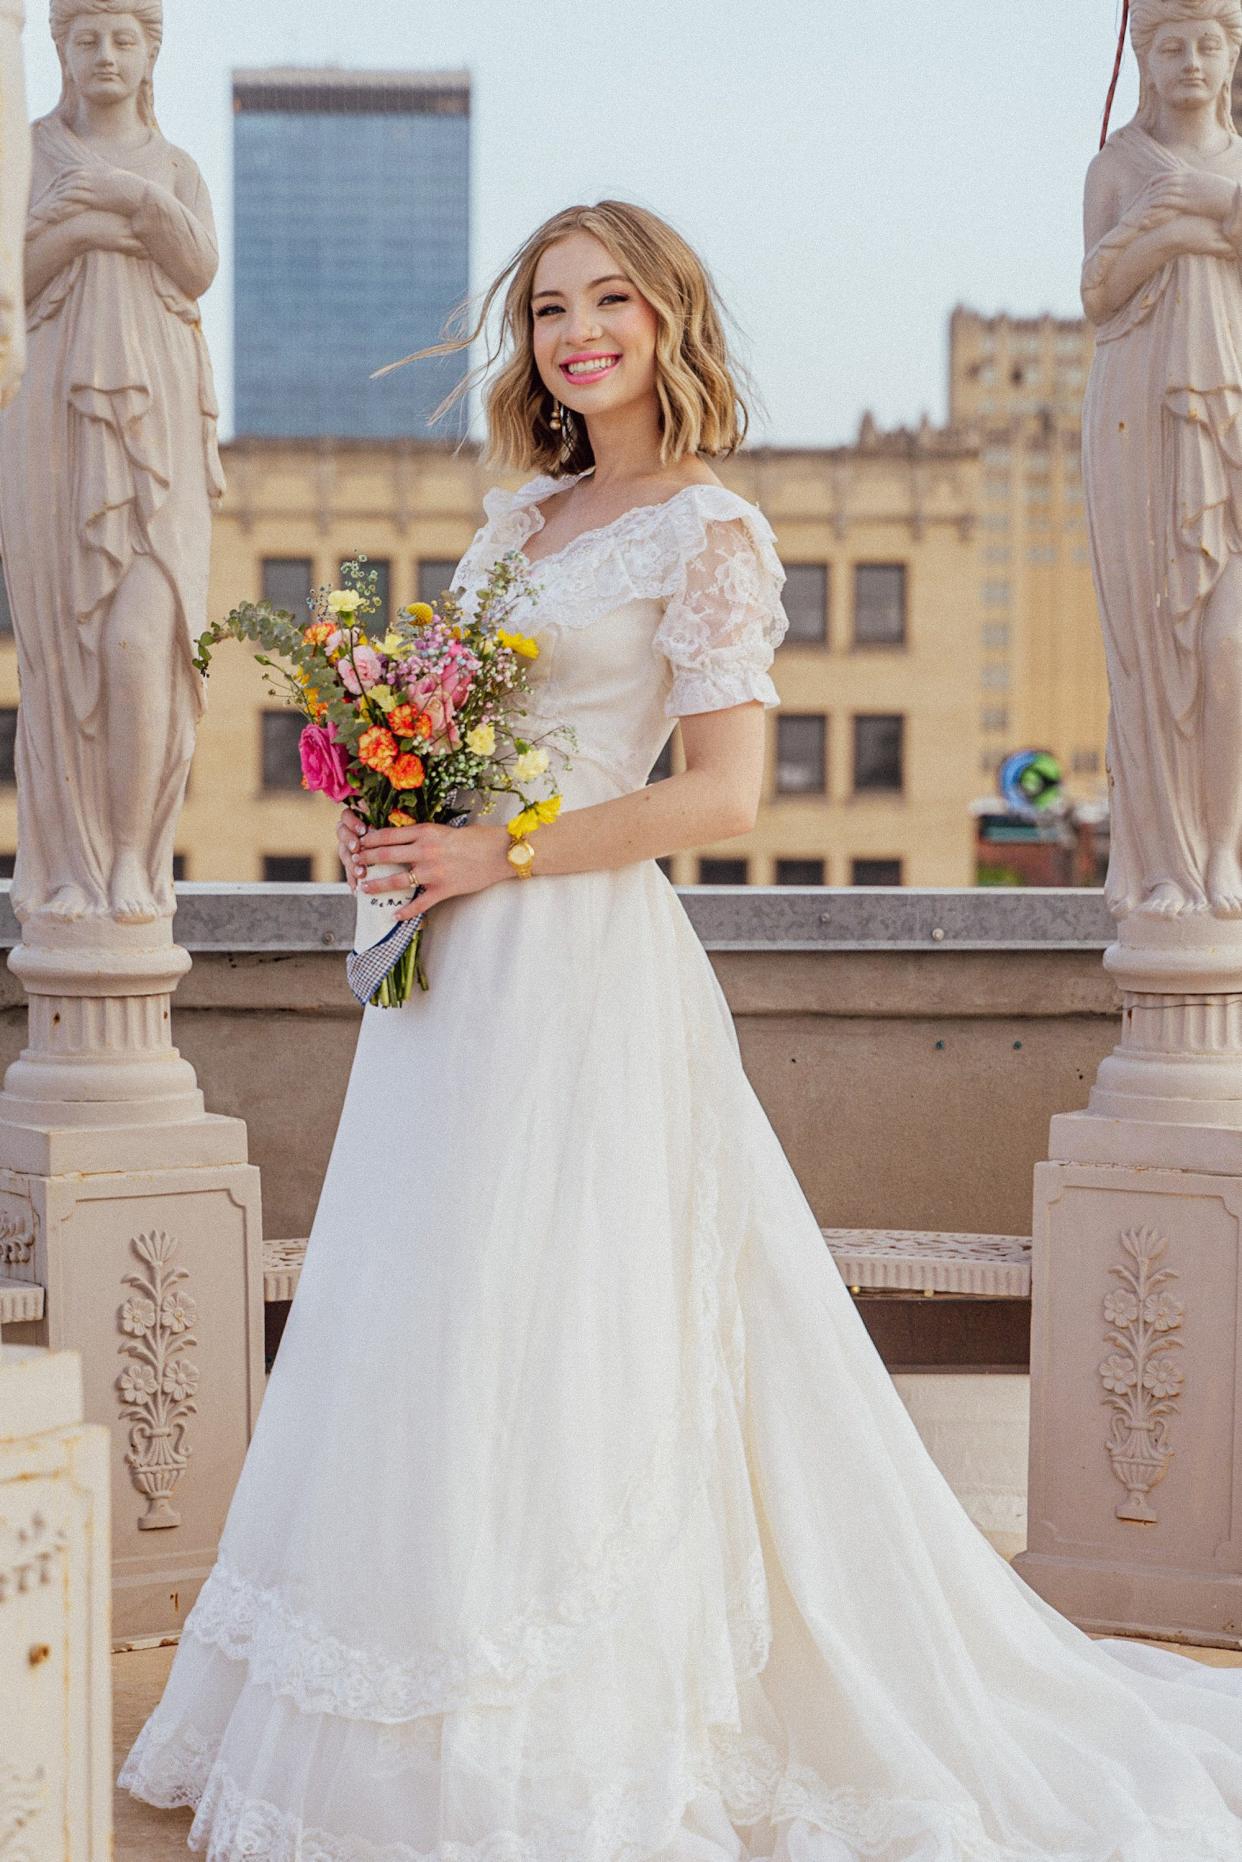 A bride smiles in her wedding dress in the middle of statues.